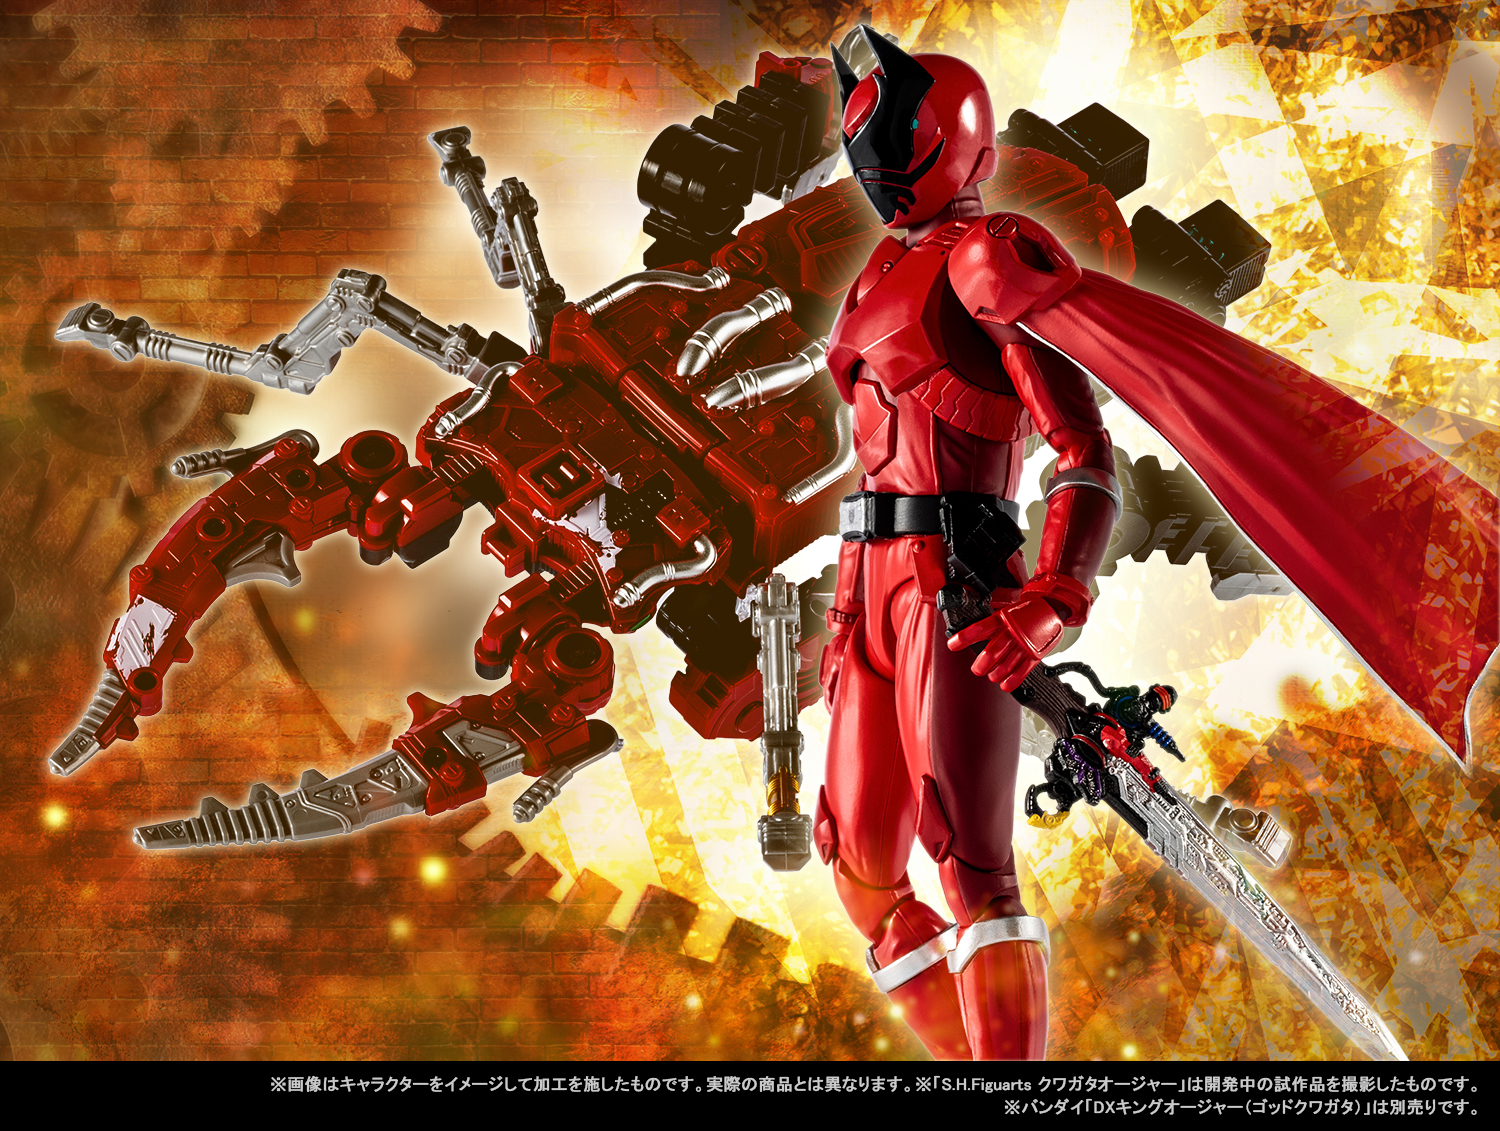 S.H.Figuarts ×x &quot;King of the King Squadron King Ojer&quot; starts! In-store reservation starts on June 1 (Thu.) &quot;KUWAGATA OHGER&quot; Great introduction of the filming!